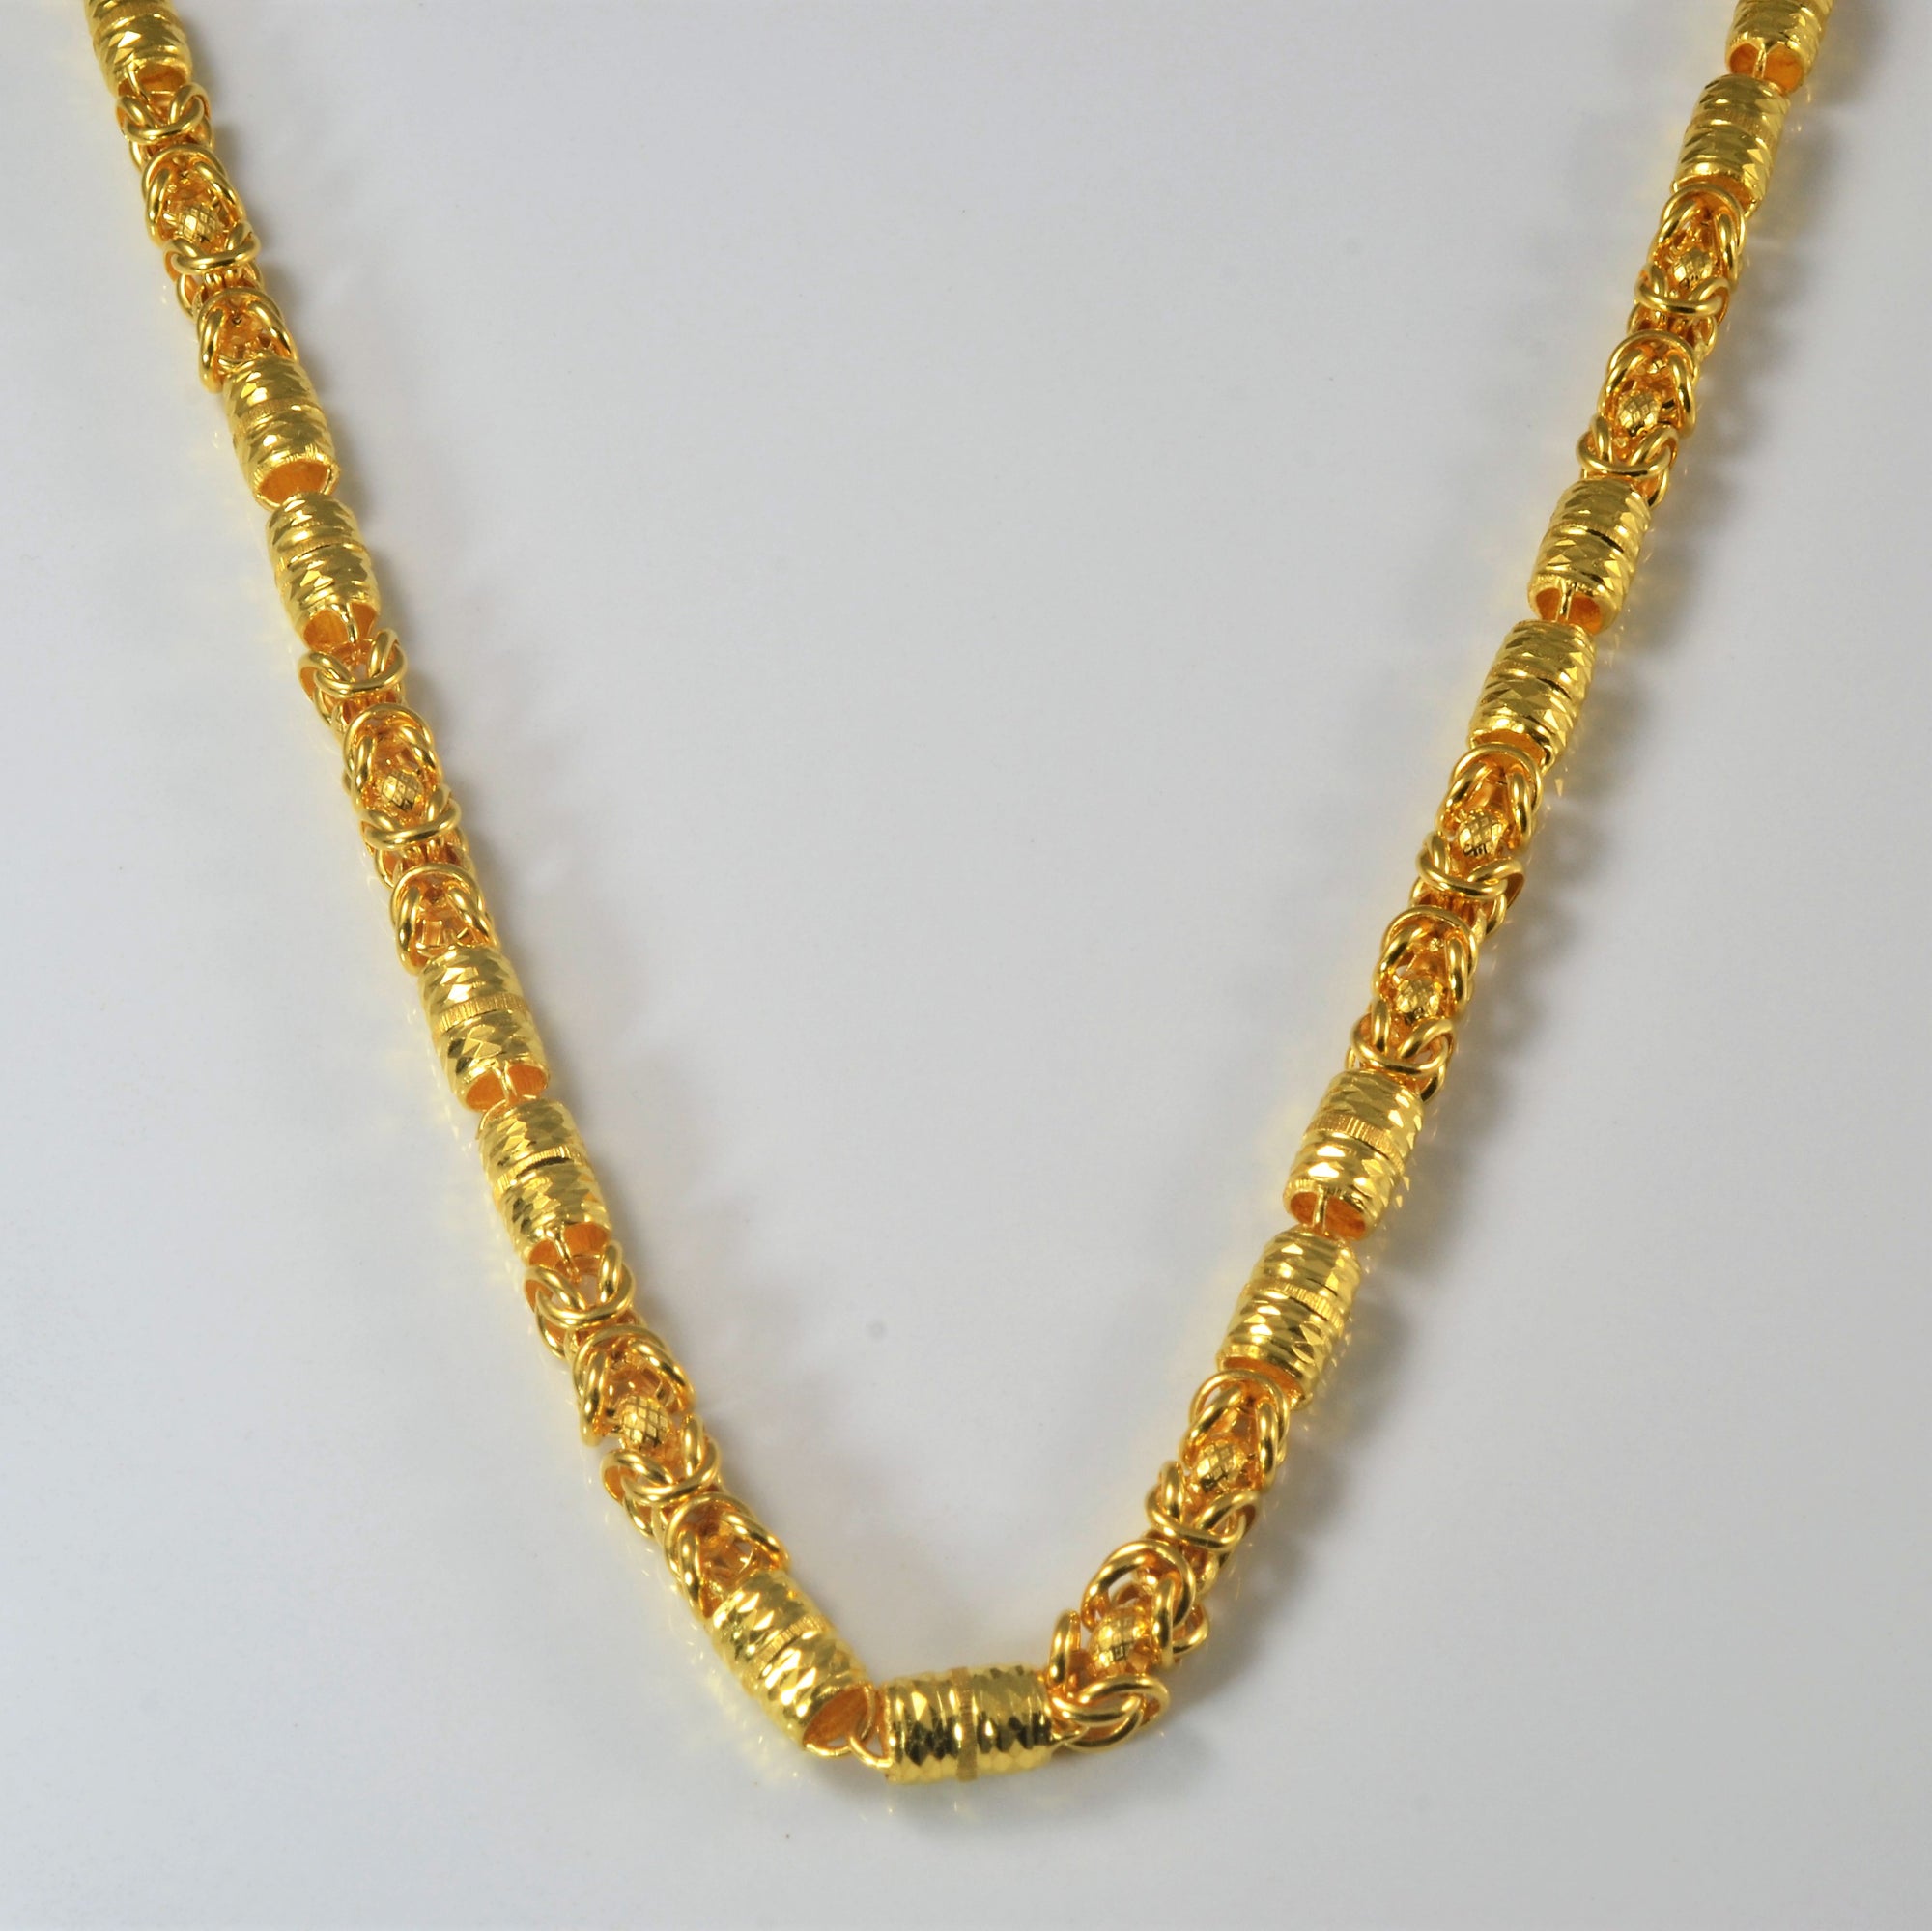 24k Gold Kings Braid Necklace | 22